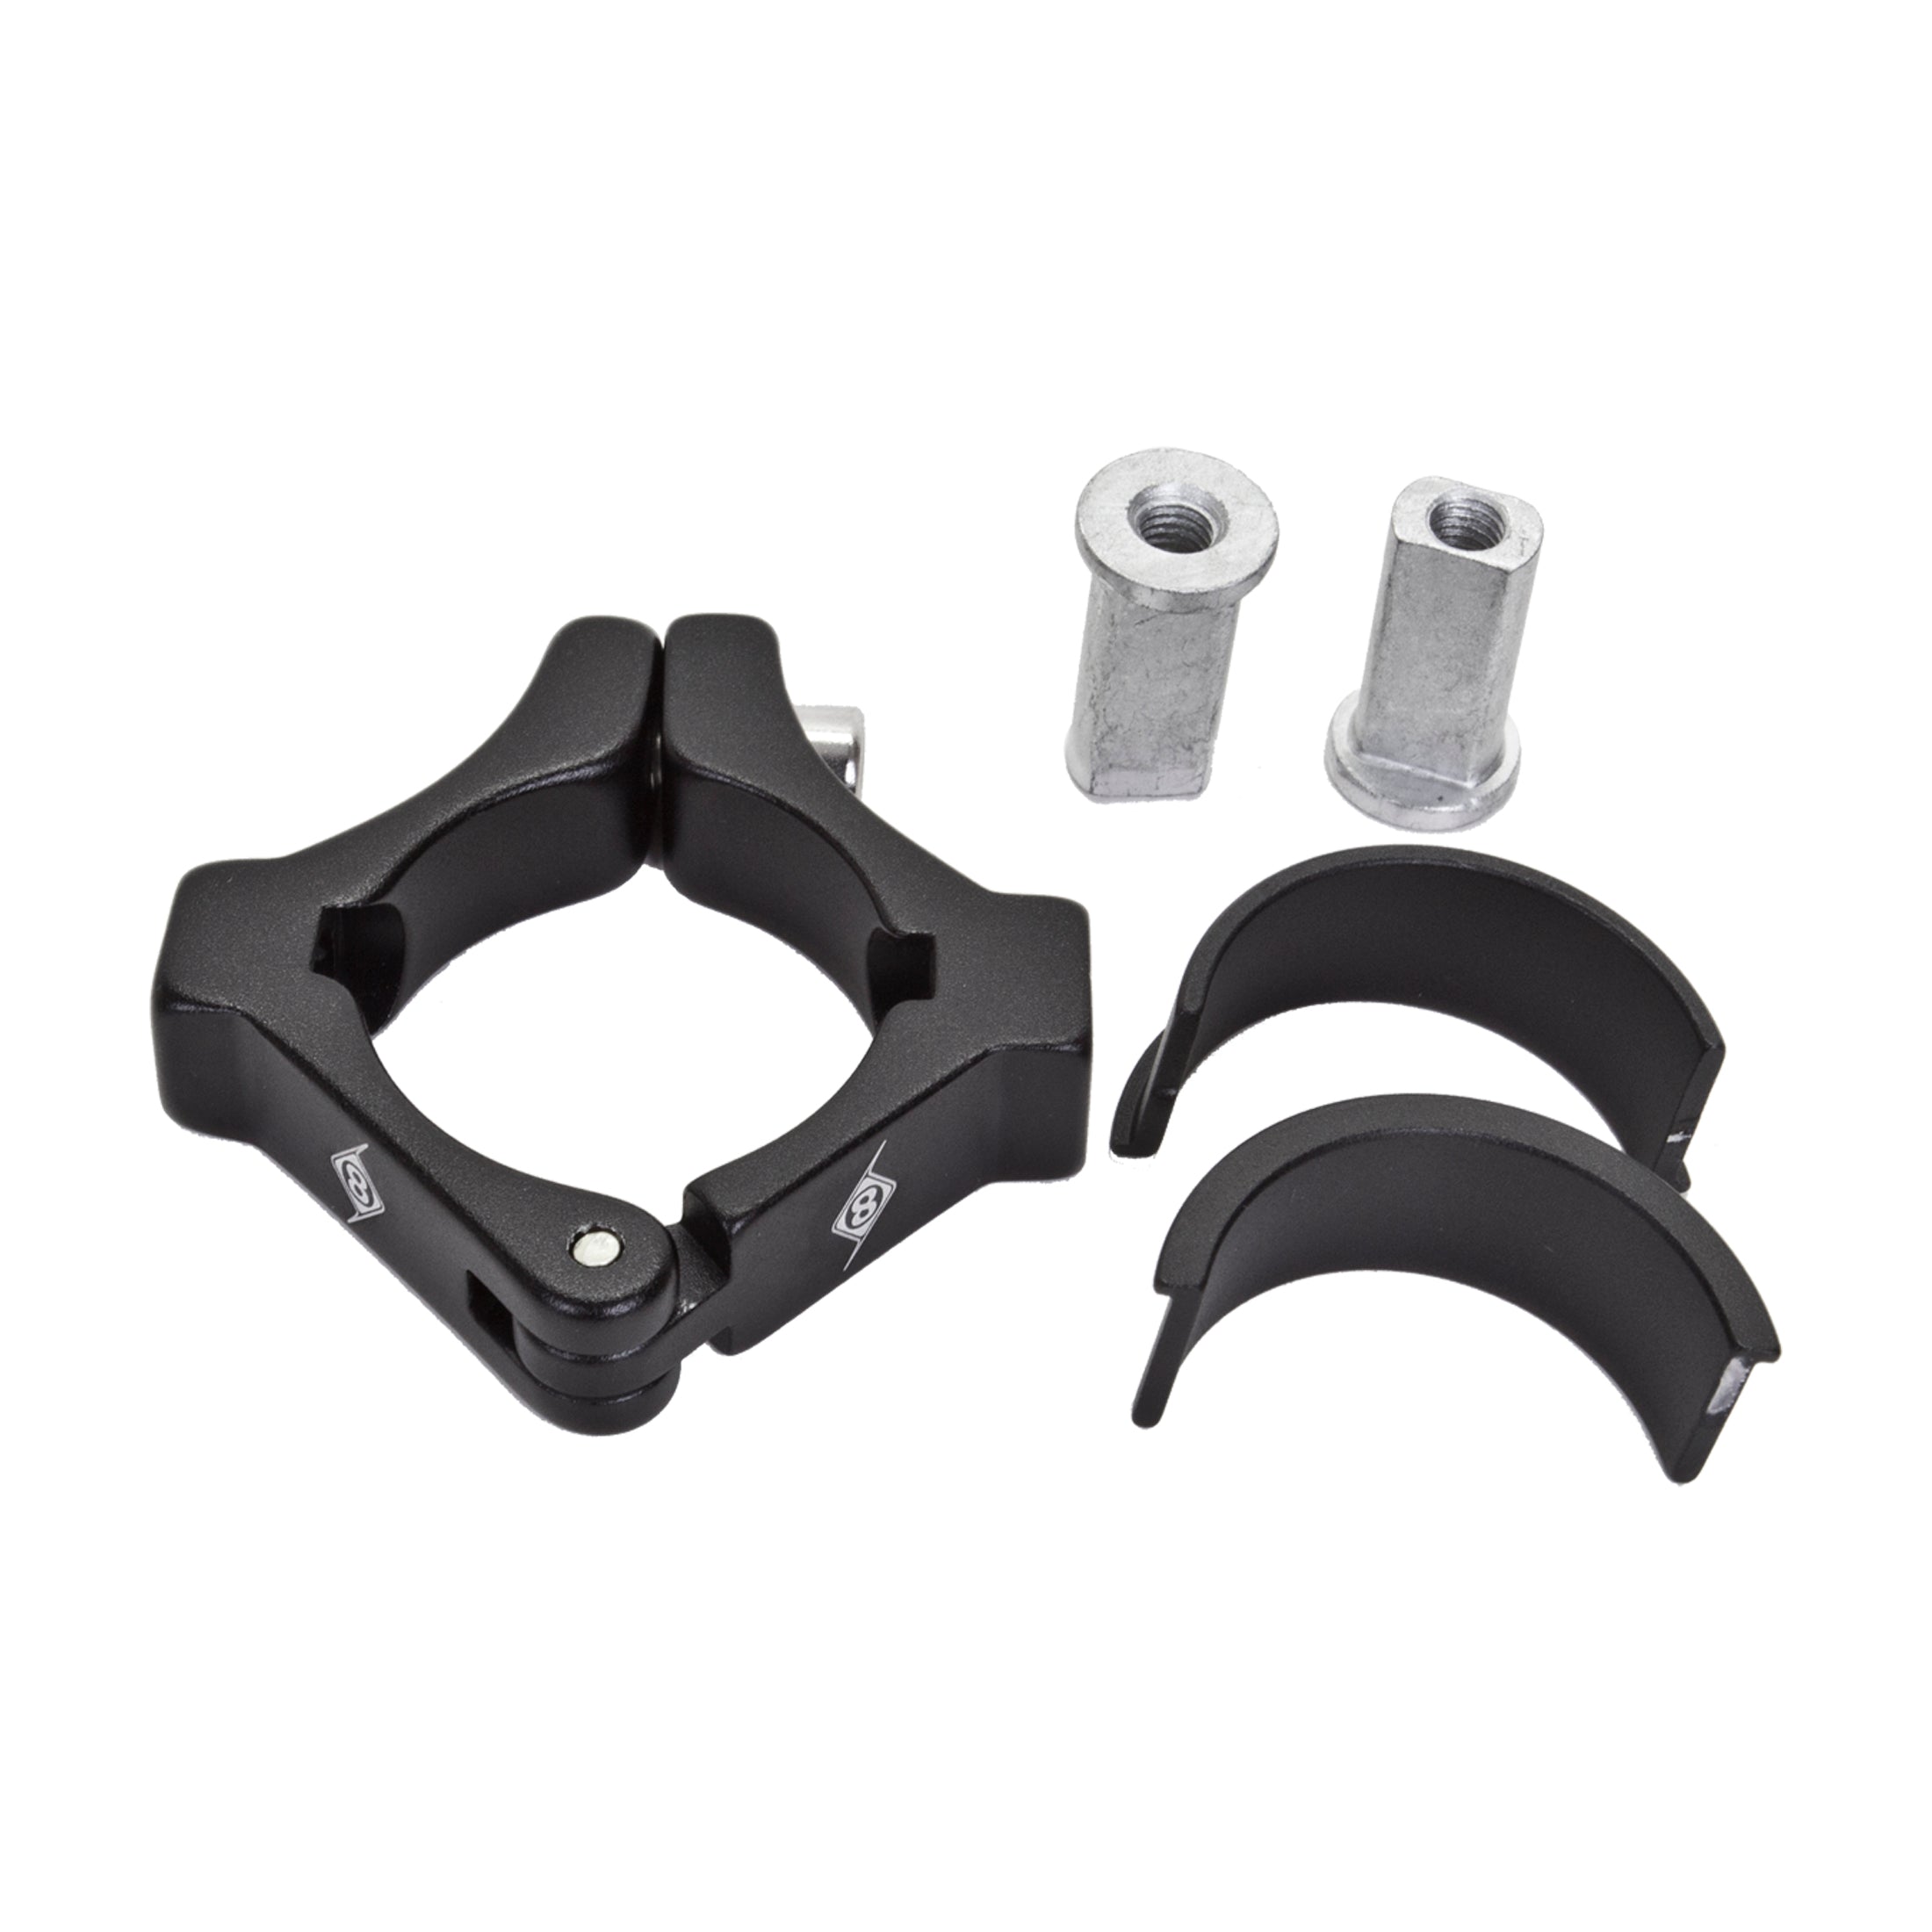 DownTube Shifter Adapter